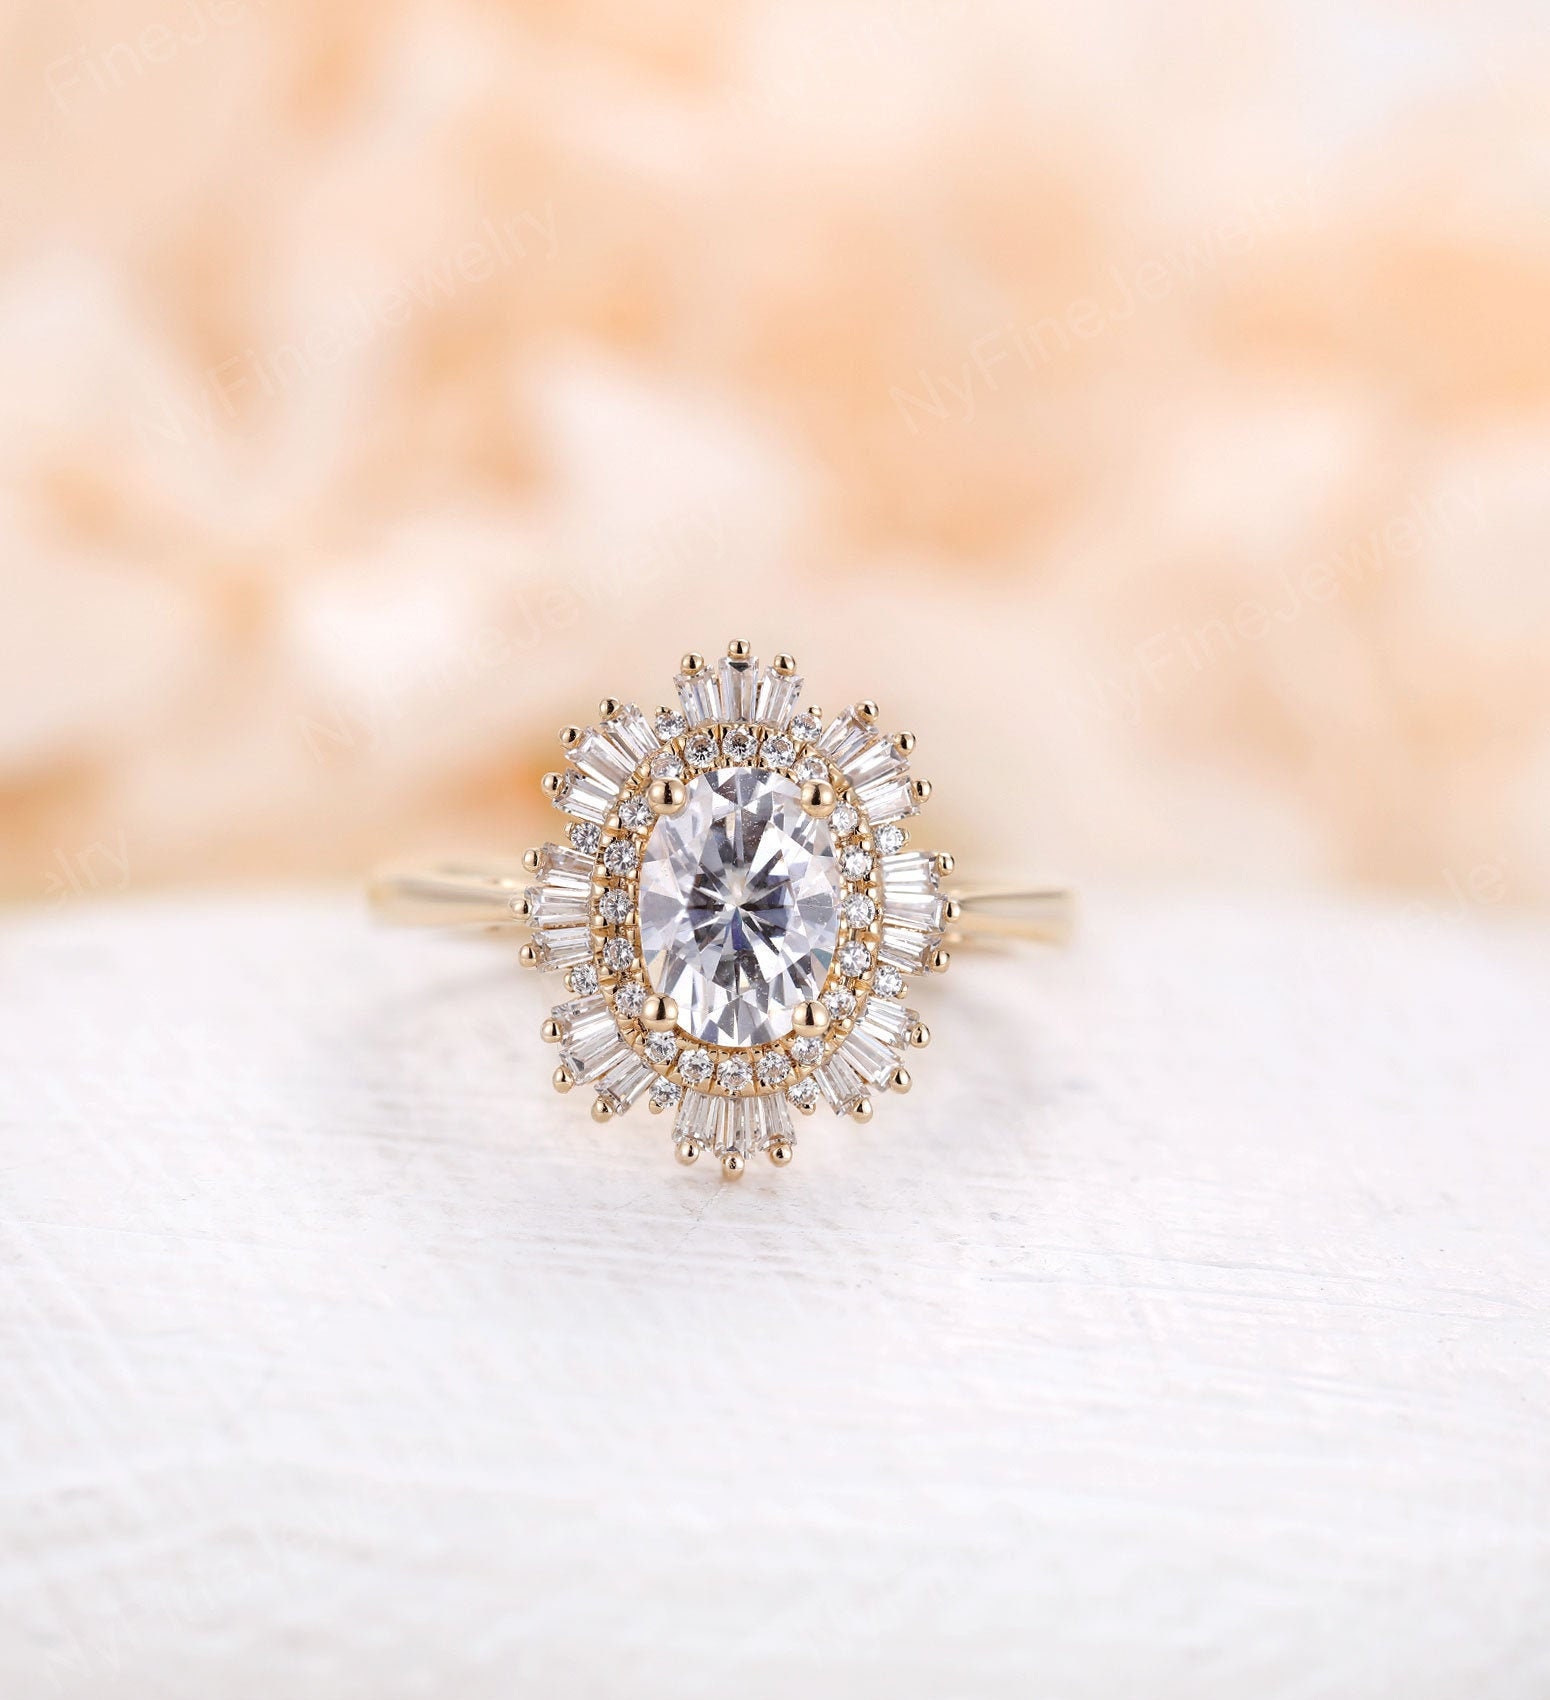 Vintage Moissanite Engagement Ring, Art Deco Ring, Solid Yellow Gold Ring, Cz/Diamond Ring, Baguette Cut Ring, Oval Prong Set Ring